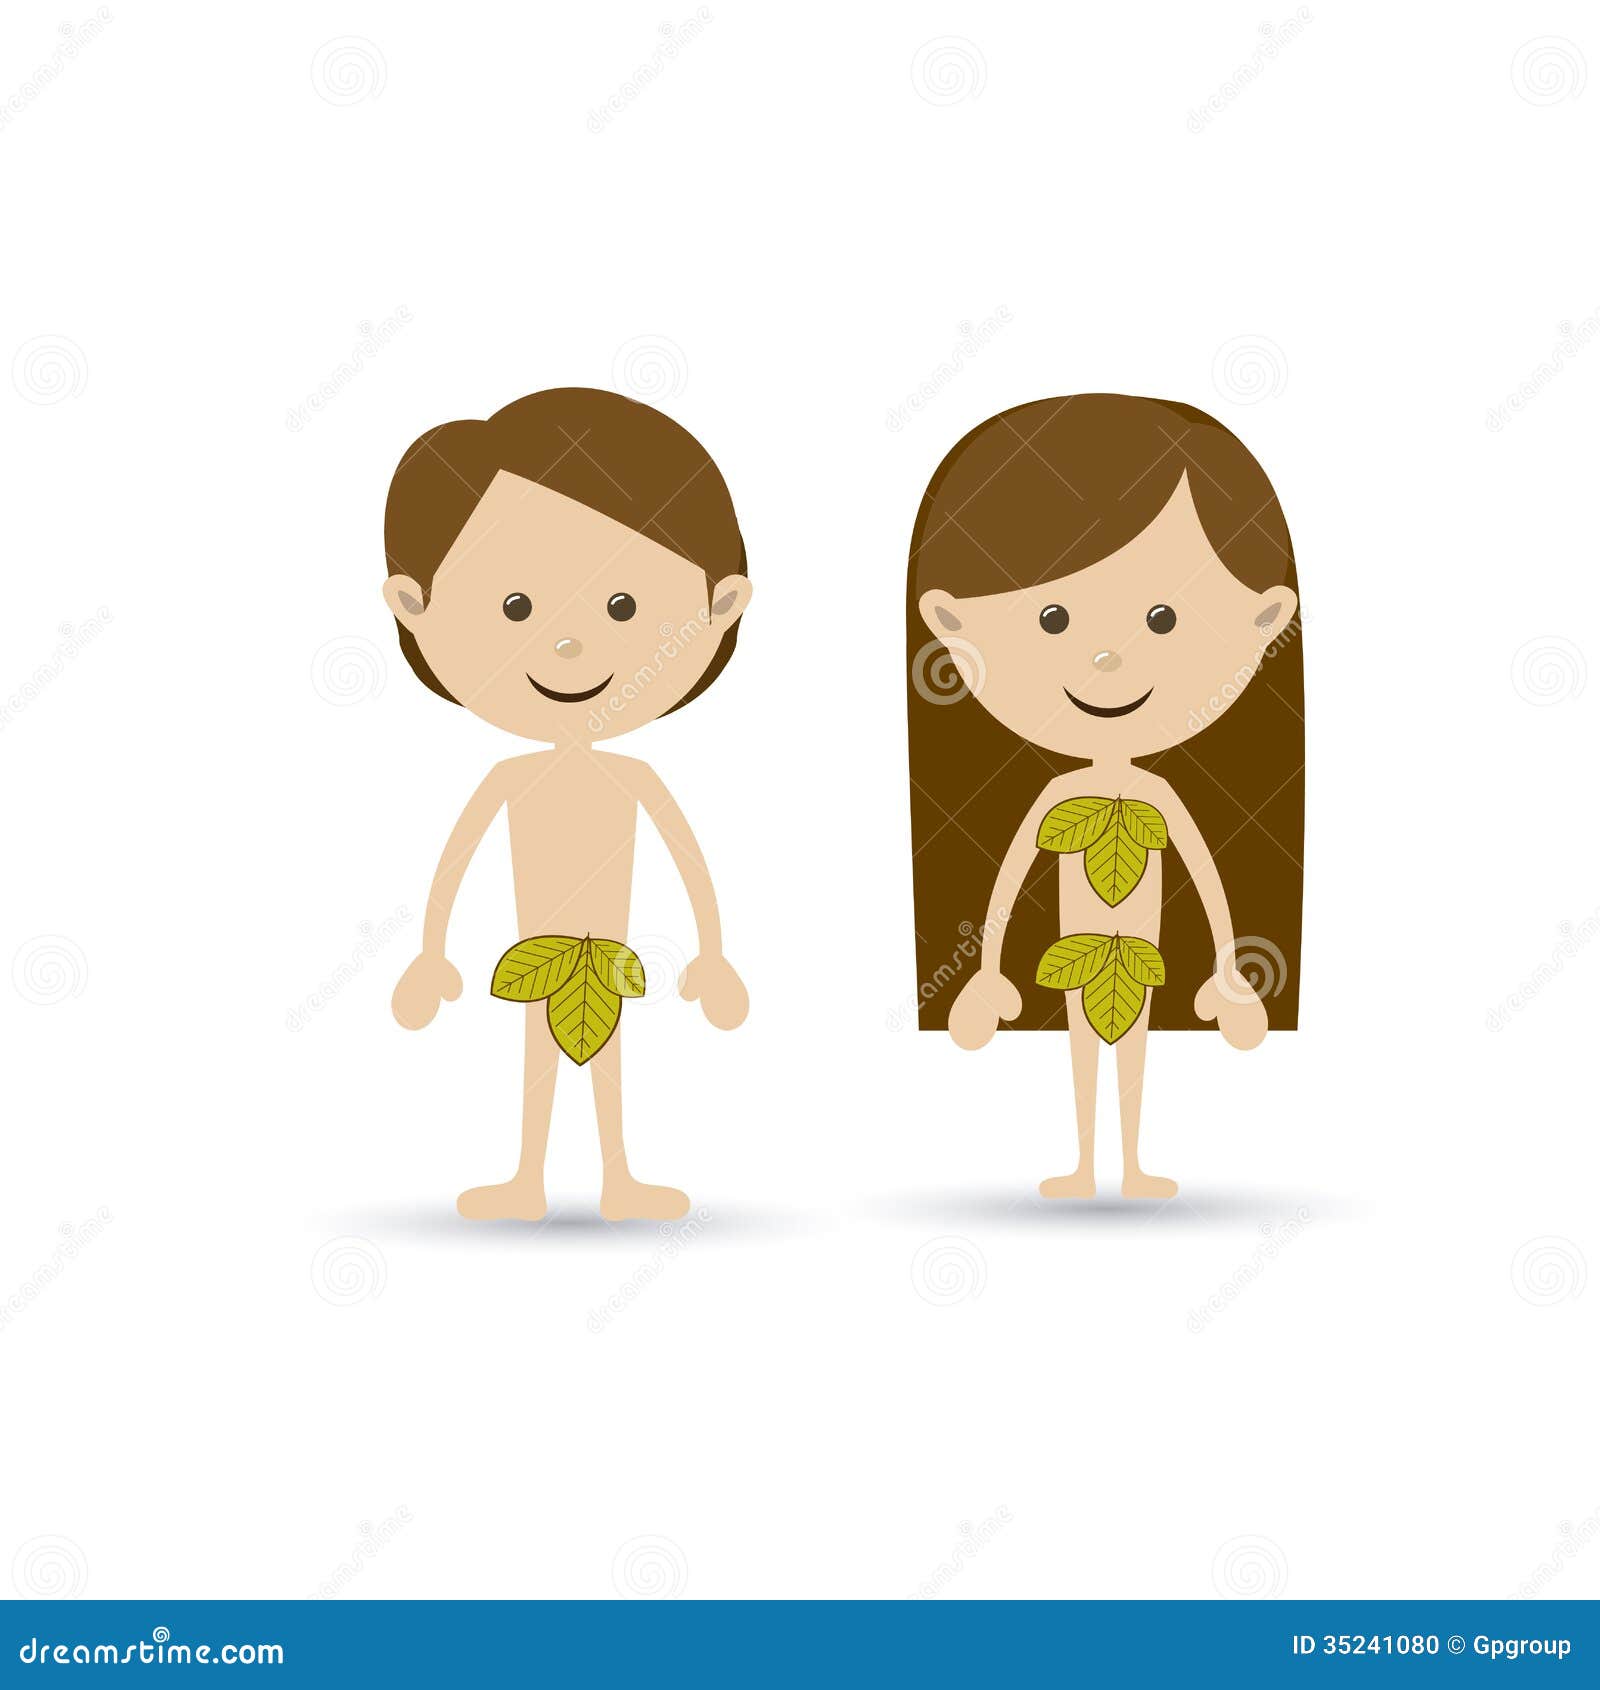 Adam And Eve Stock Illustration - Download Image Now - iStock